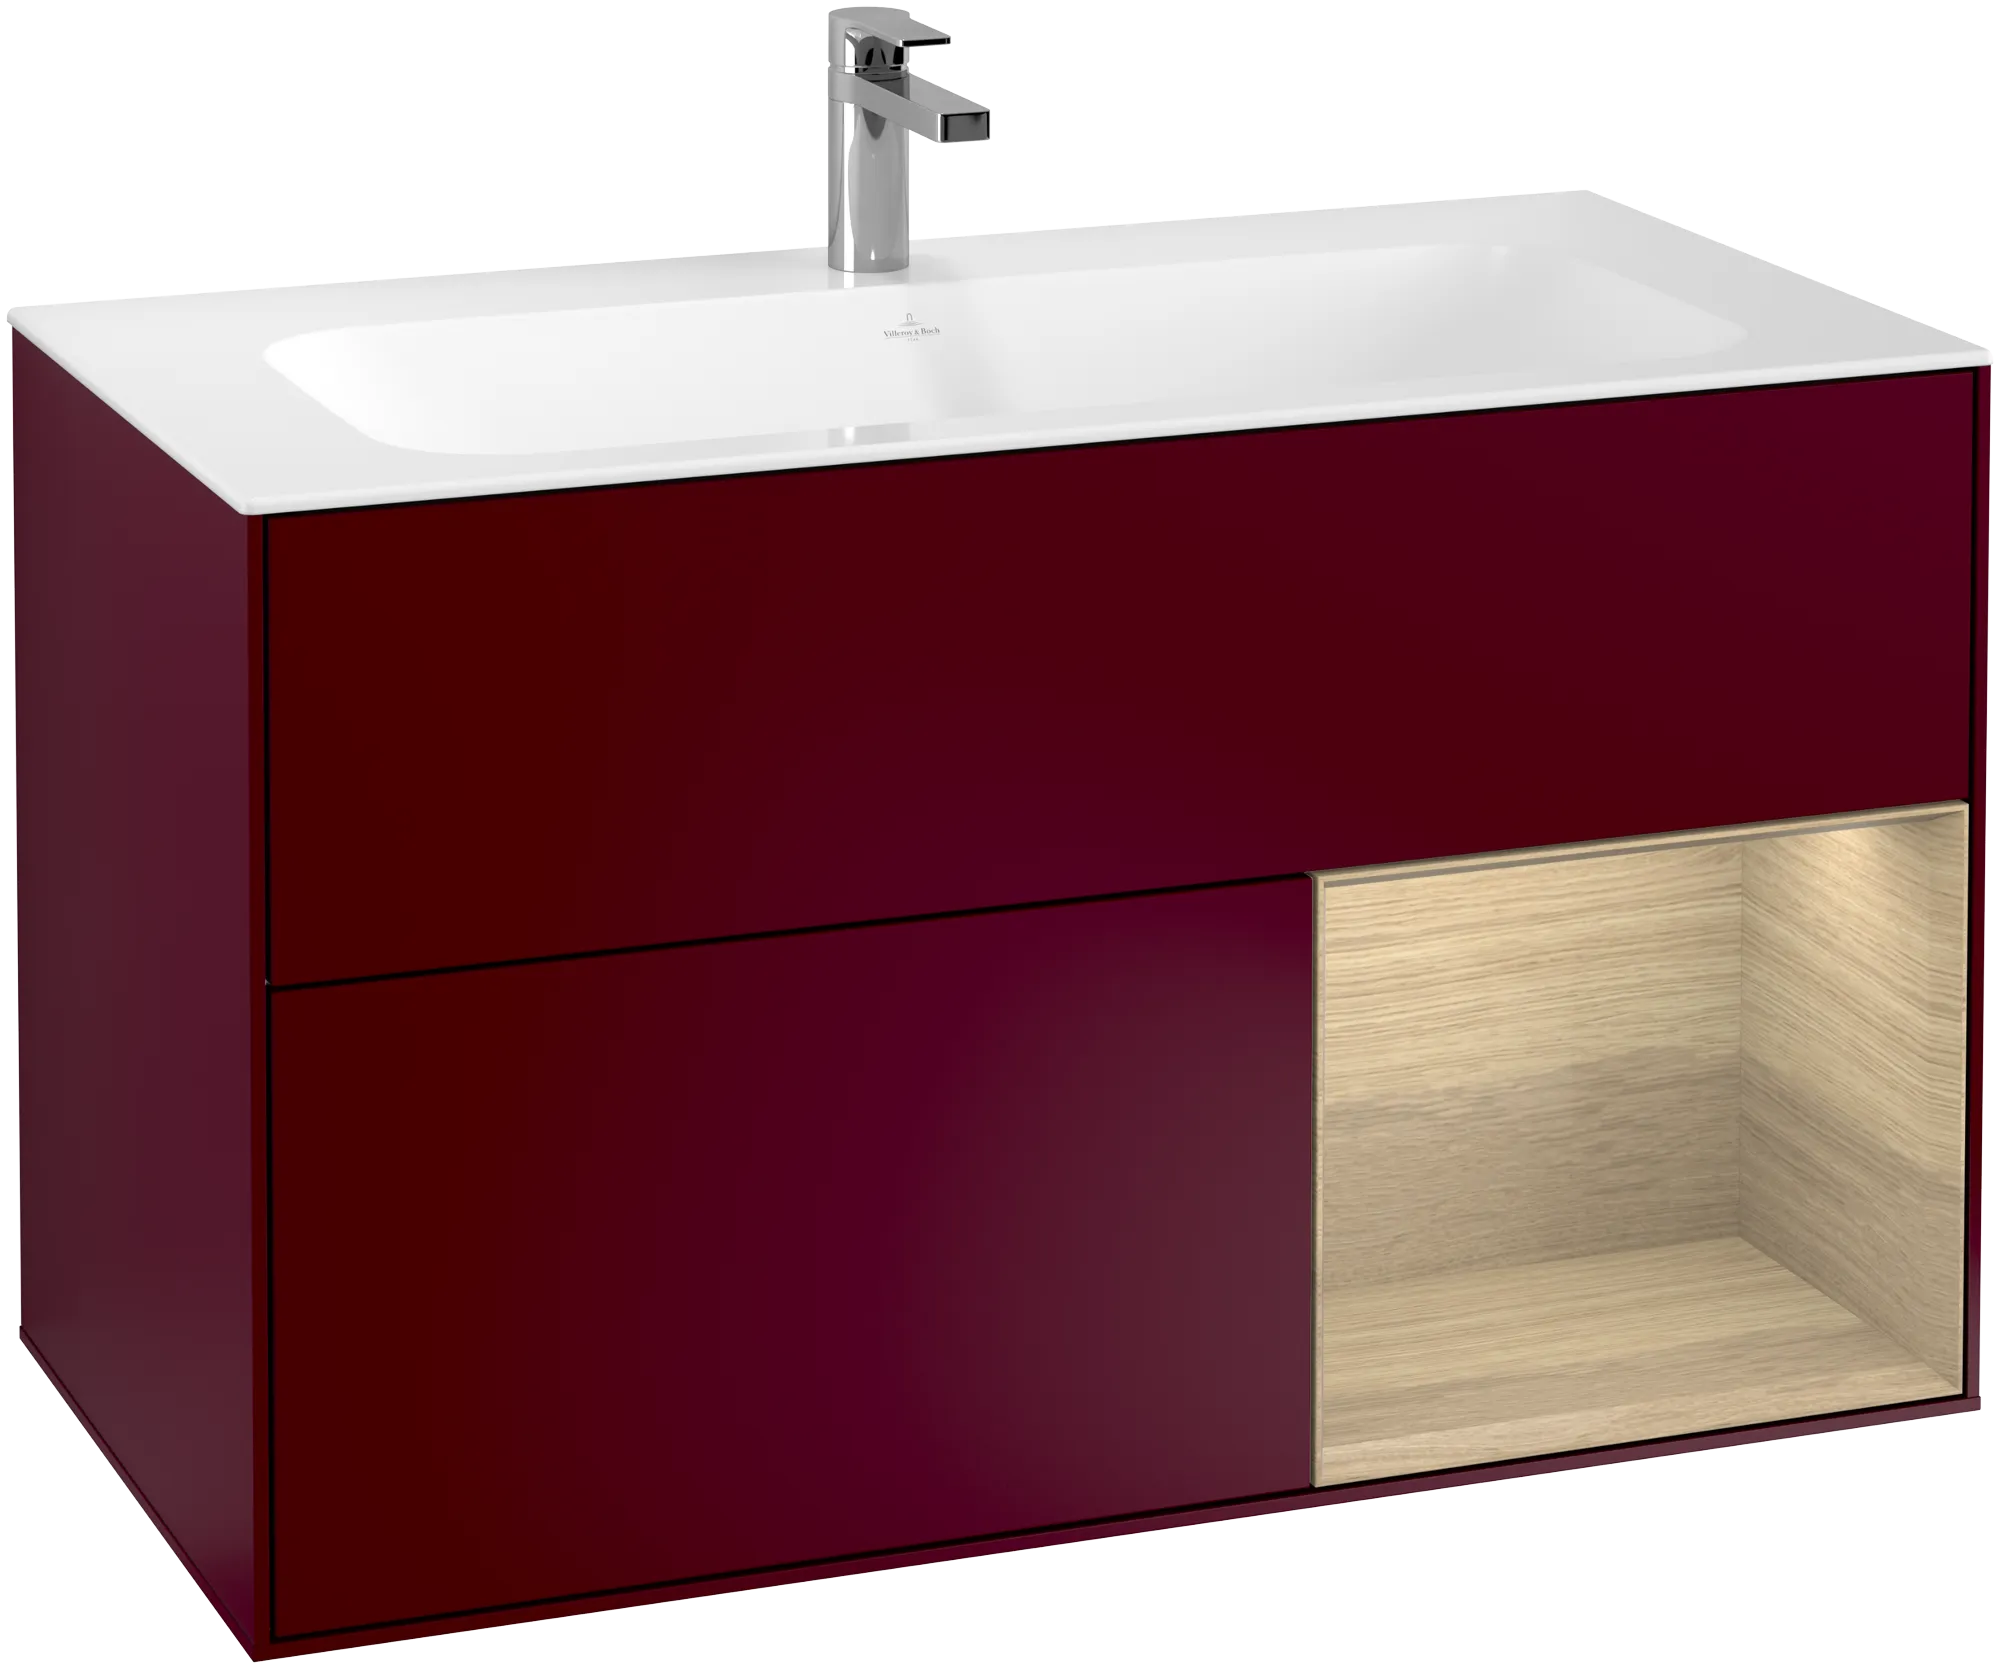 Picture of VILLEROY BOCH Finion Vanity unit, with lighting, 2 pull-out compartments, 996 x 591 x 498 mm, Peony Matt Lacquer / Oak Veneer #G040PCHB